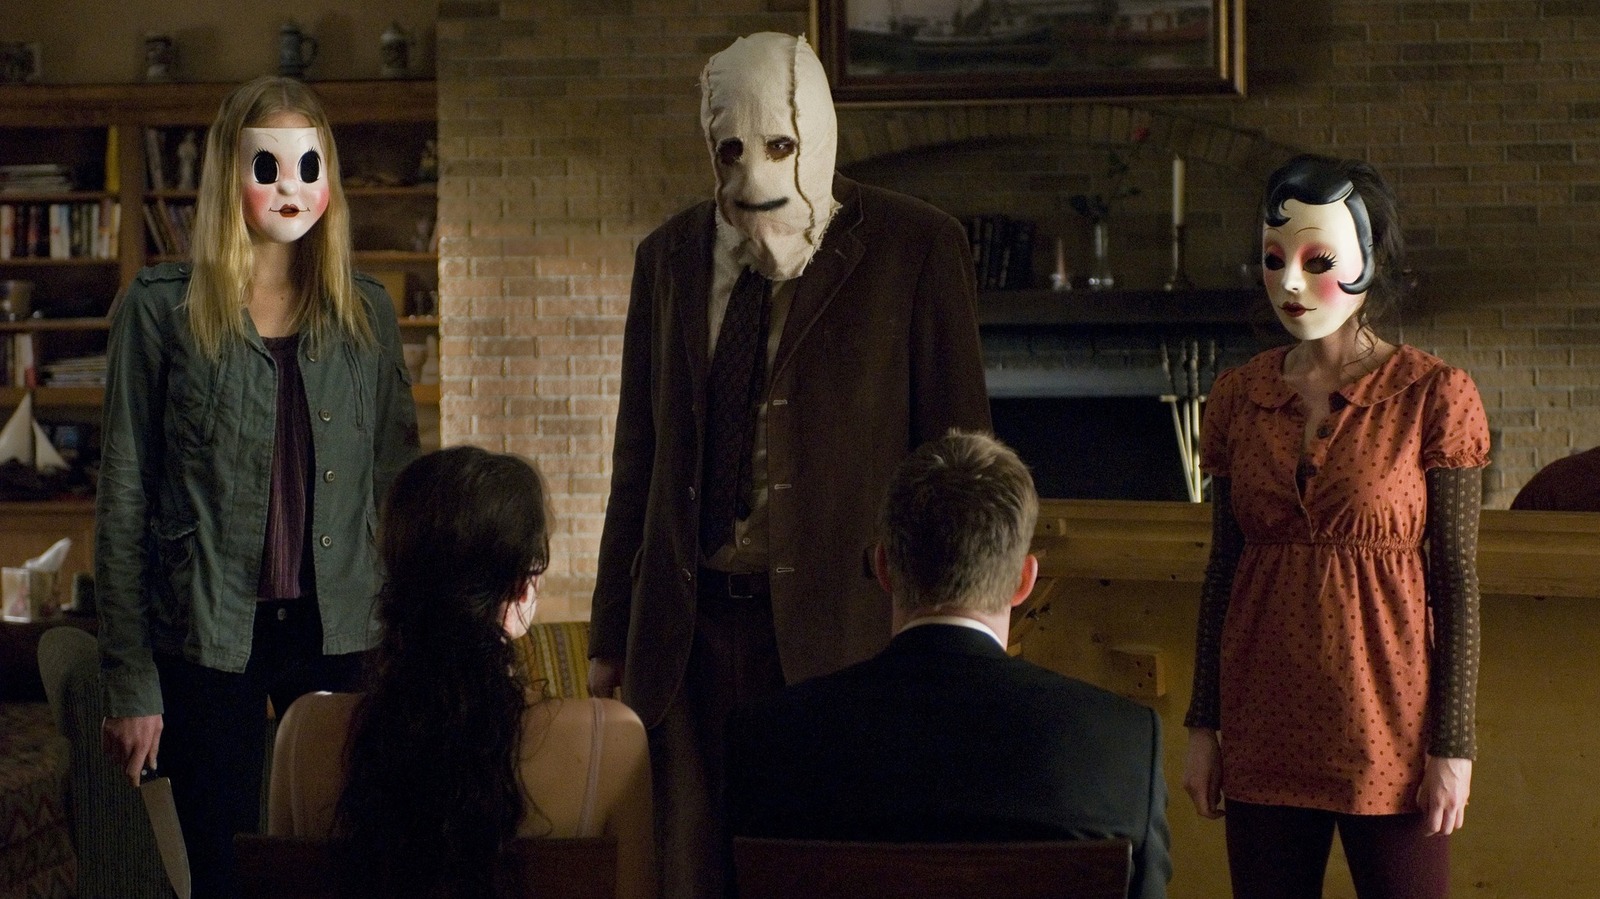 The Strangers Is Getting Three More Sequels, Production Begins Soon